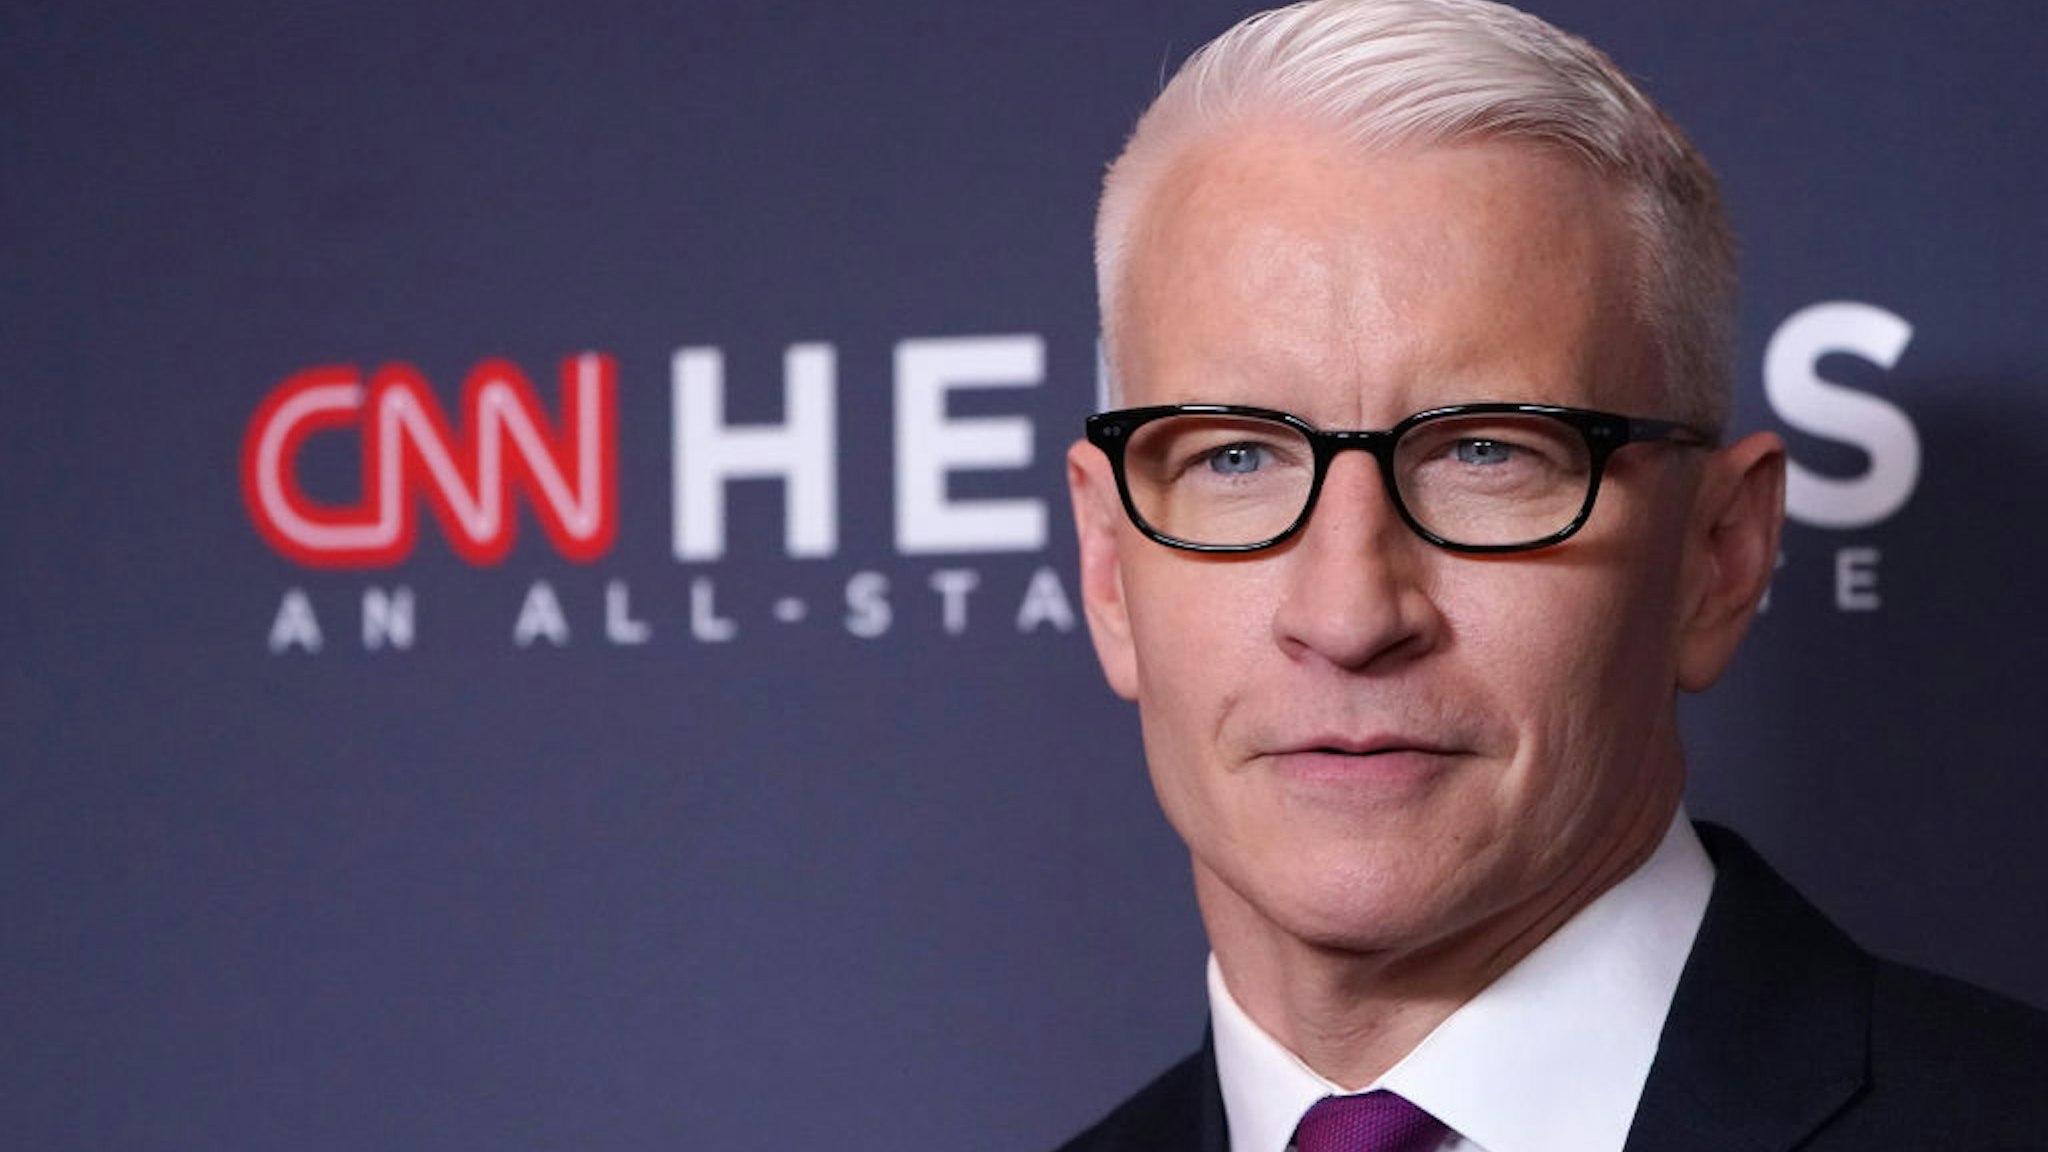 NEW YORK, NEW YORK - DECEMBER 08: Anderson Cooper attends the 13th Annual CNN Heroes at the American Museum of Natural History on December 08, 2019 in New York City. (Photo by J. Countess/Getty Images)